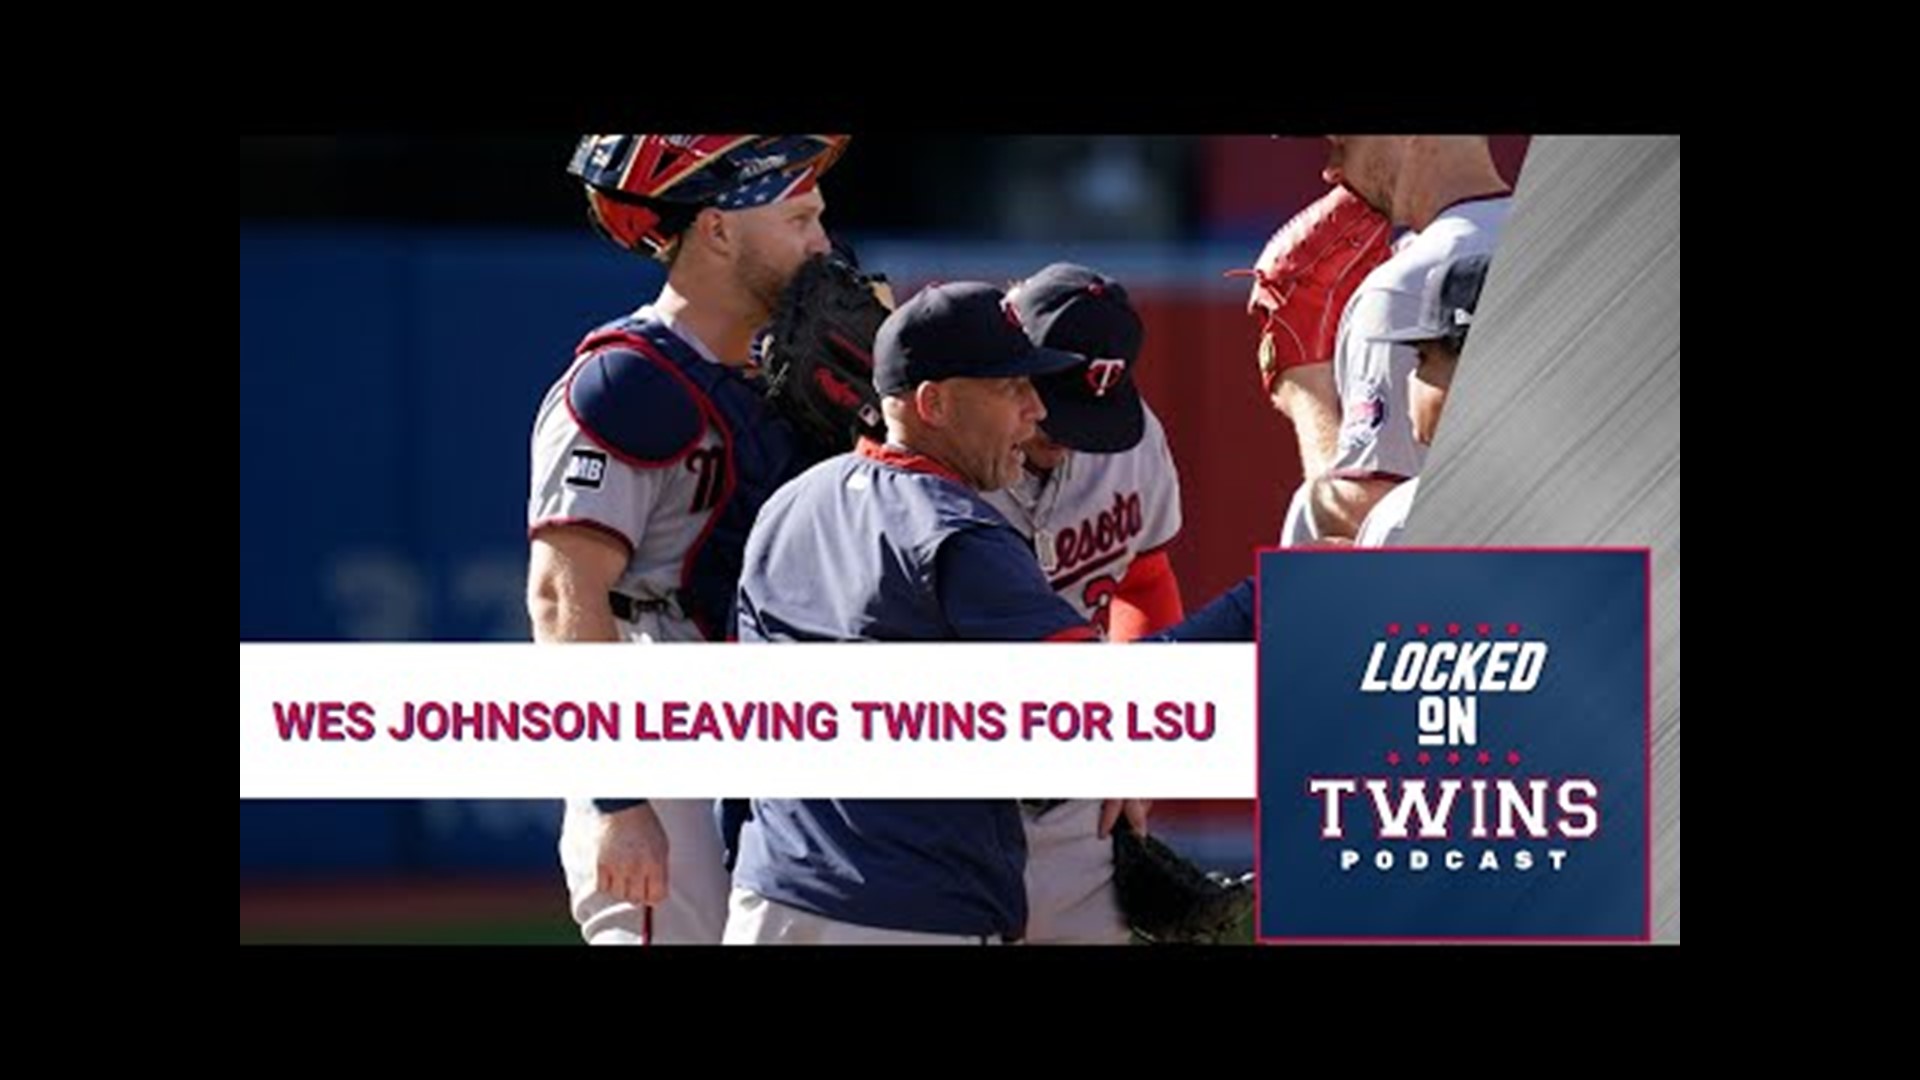 Minnesota Twins pitching coach Wes Johnson is leaving the team for the same position at LSU. Johnson has been the Twins' pitching coach since 2019.